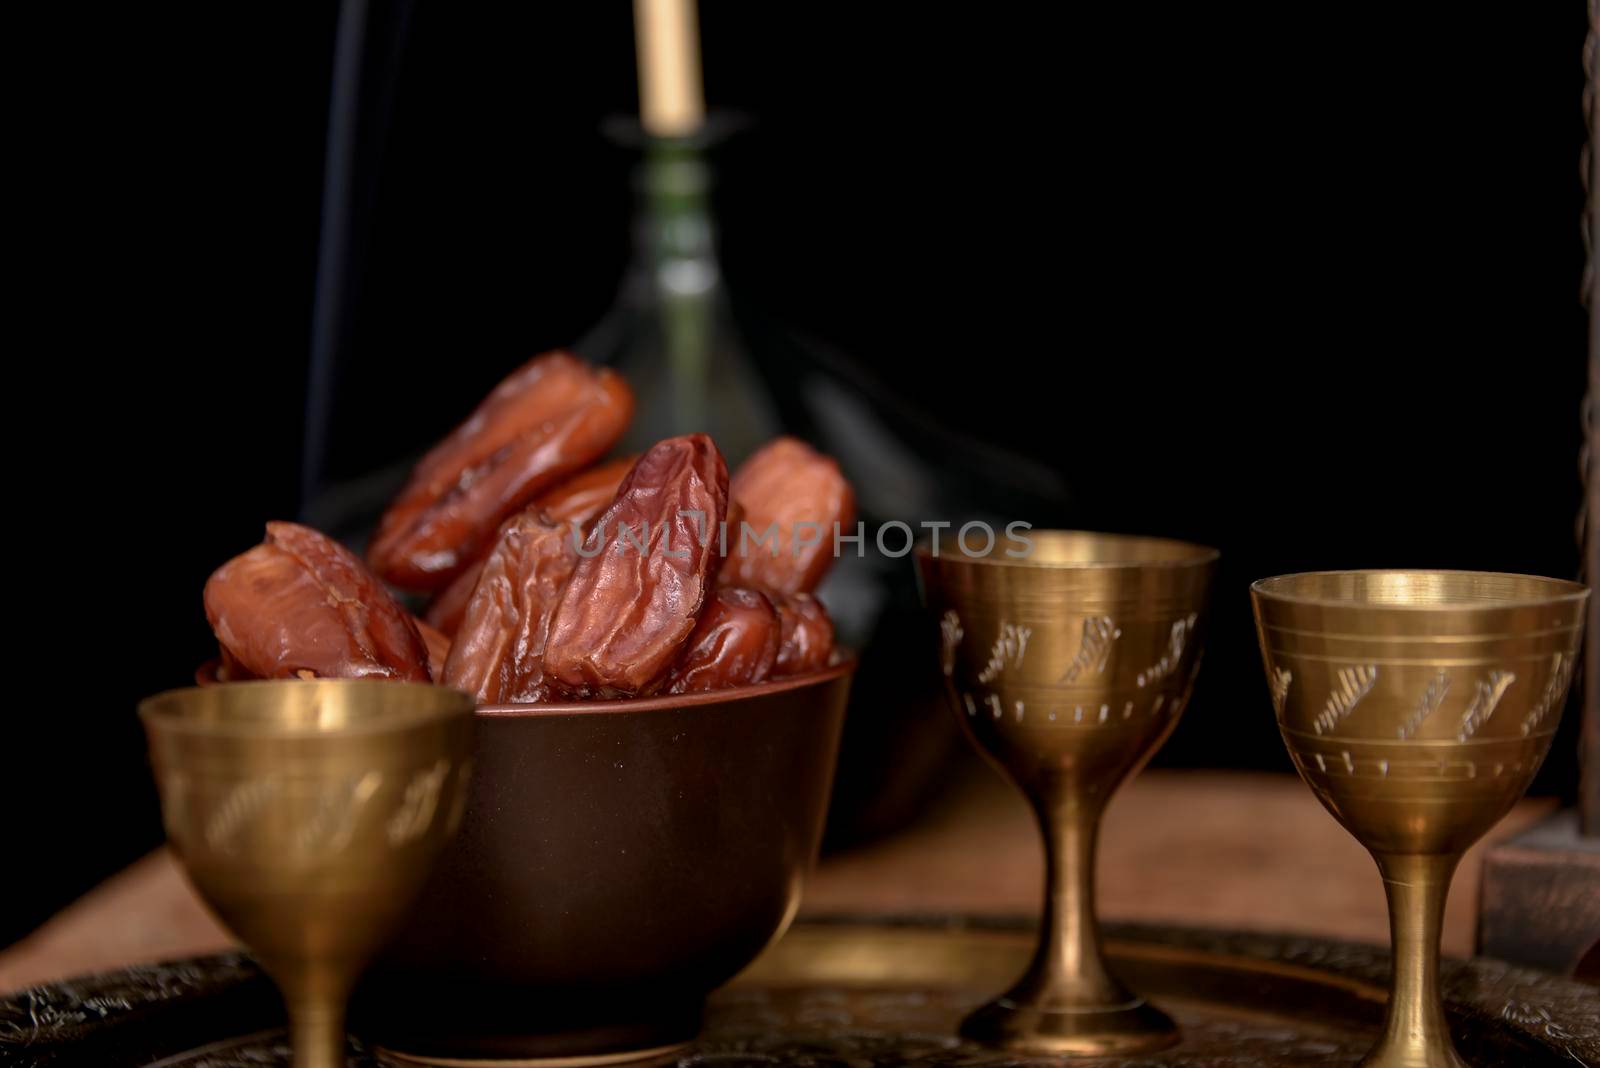 Ramadan concept. Dates closeup in the foreground. Ramadan Lantern on a wooden table. Textured black wall background. by jbruiz78